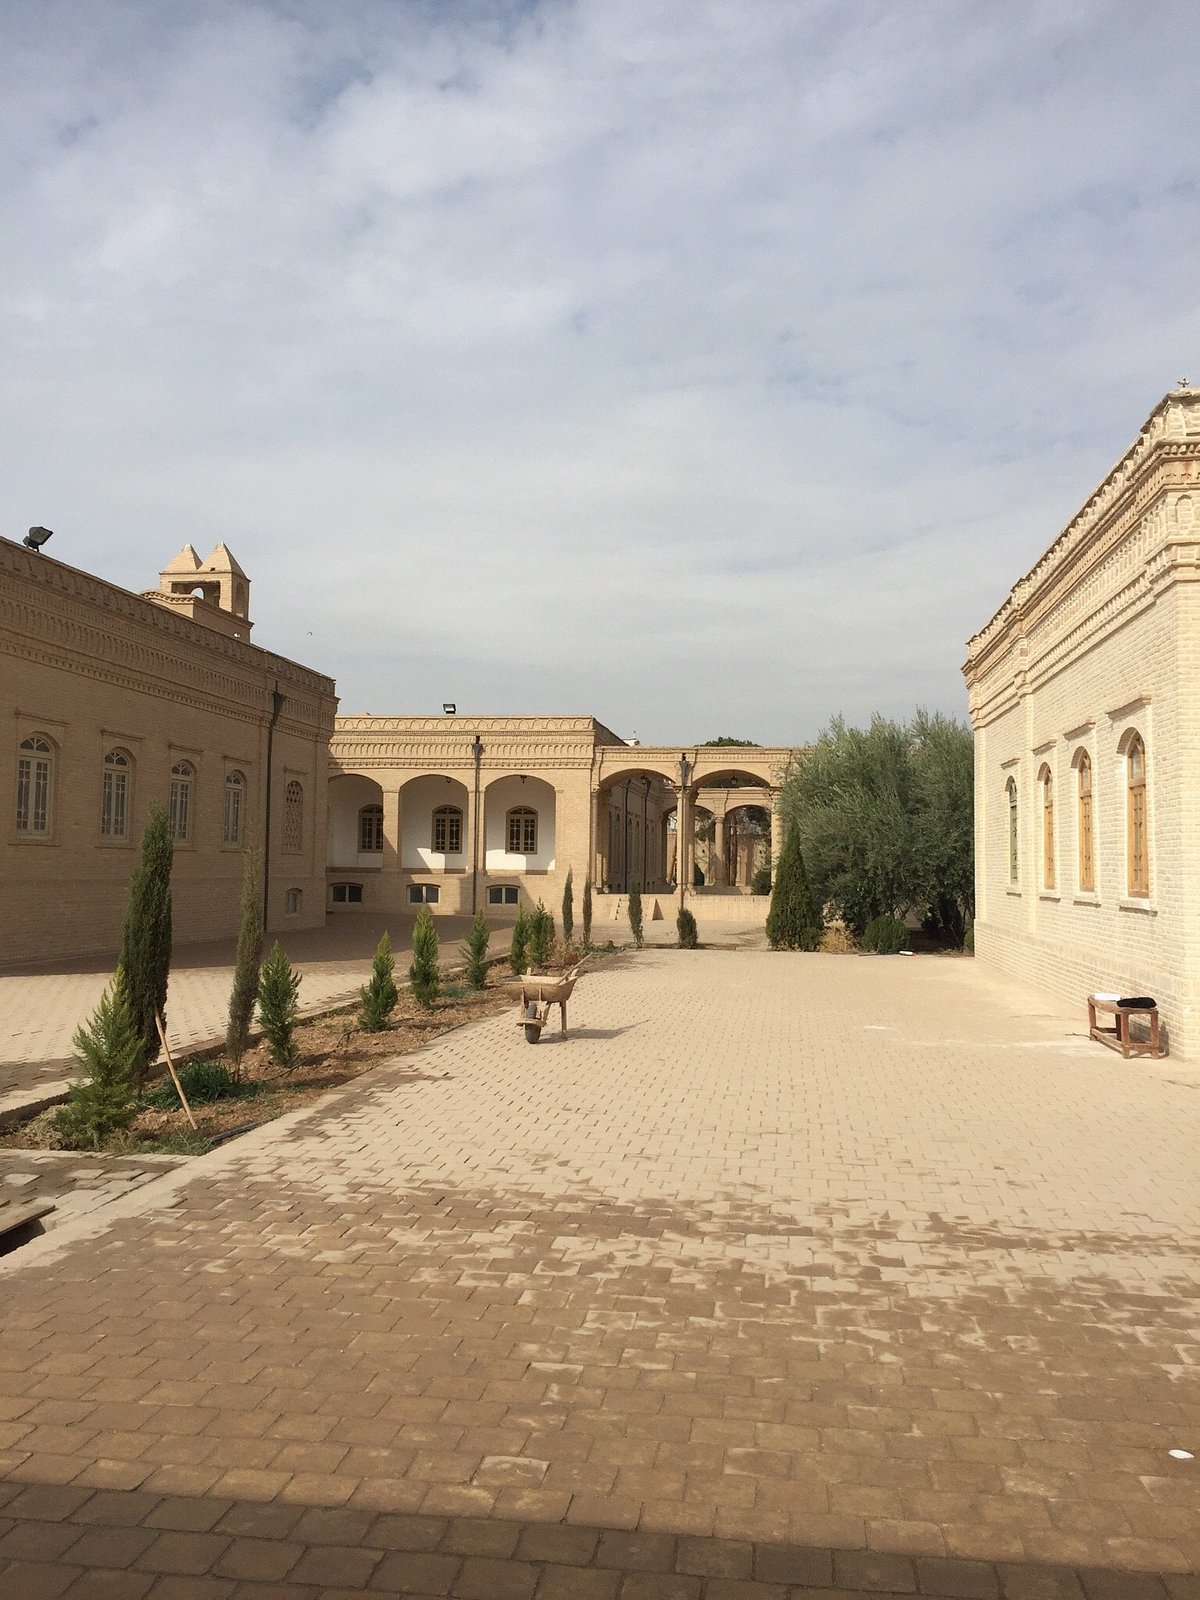 Zoroastrians History and Culture Museum, Yazd